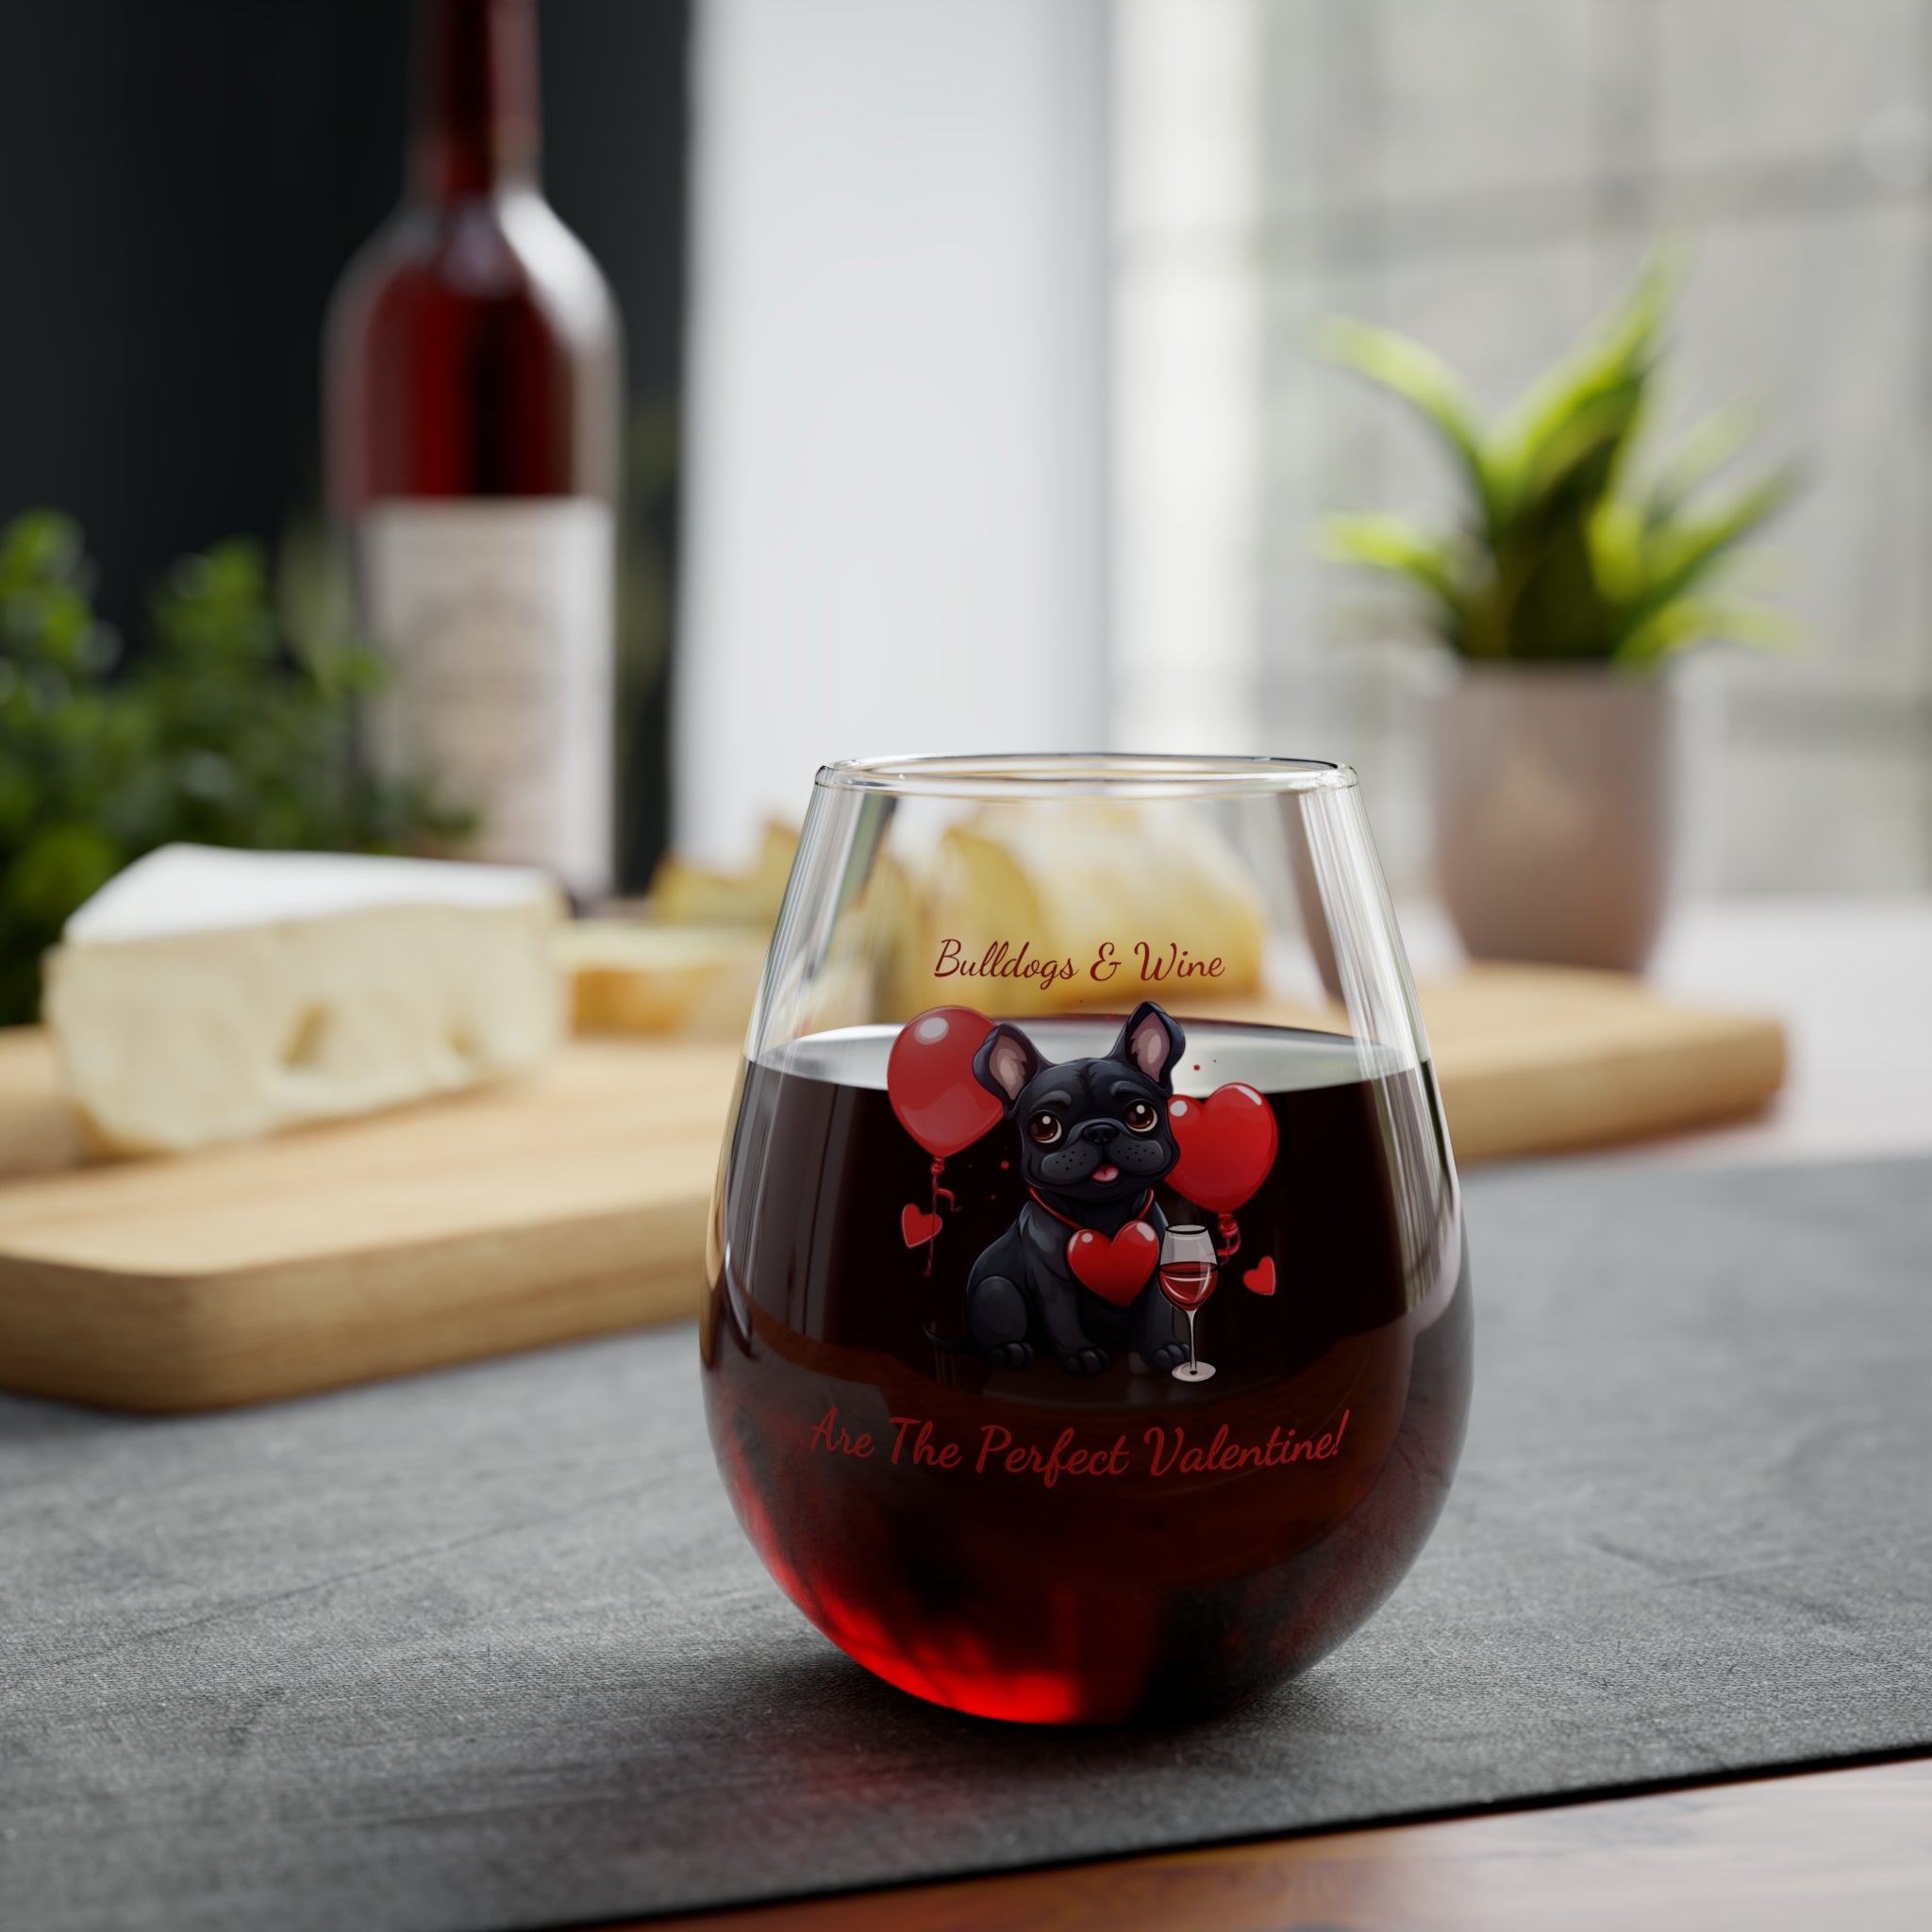 Bulldogs & Wine Are the Perfect Valentine! Stemless Wine Glass - Black French